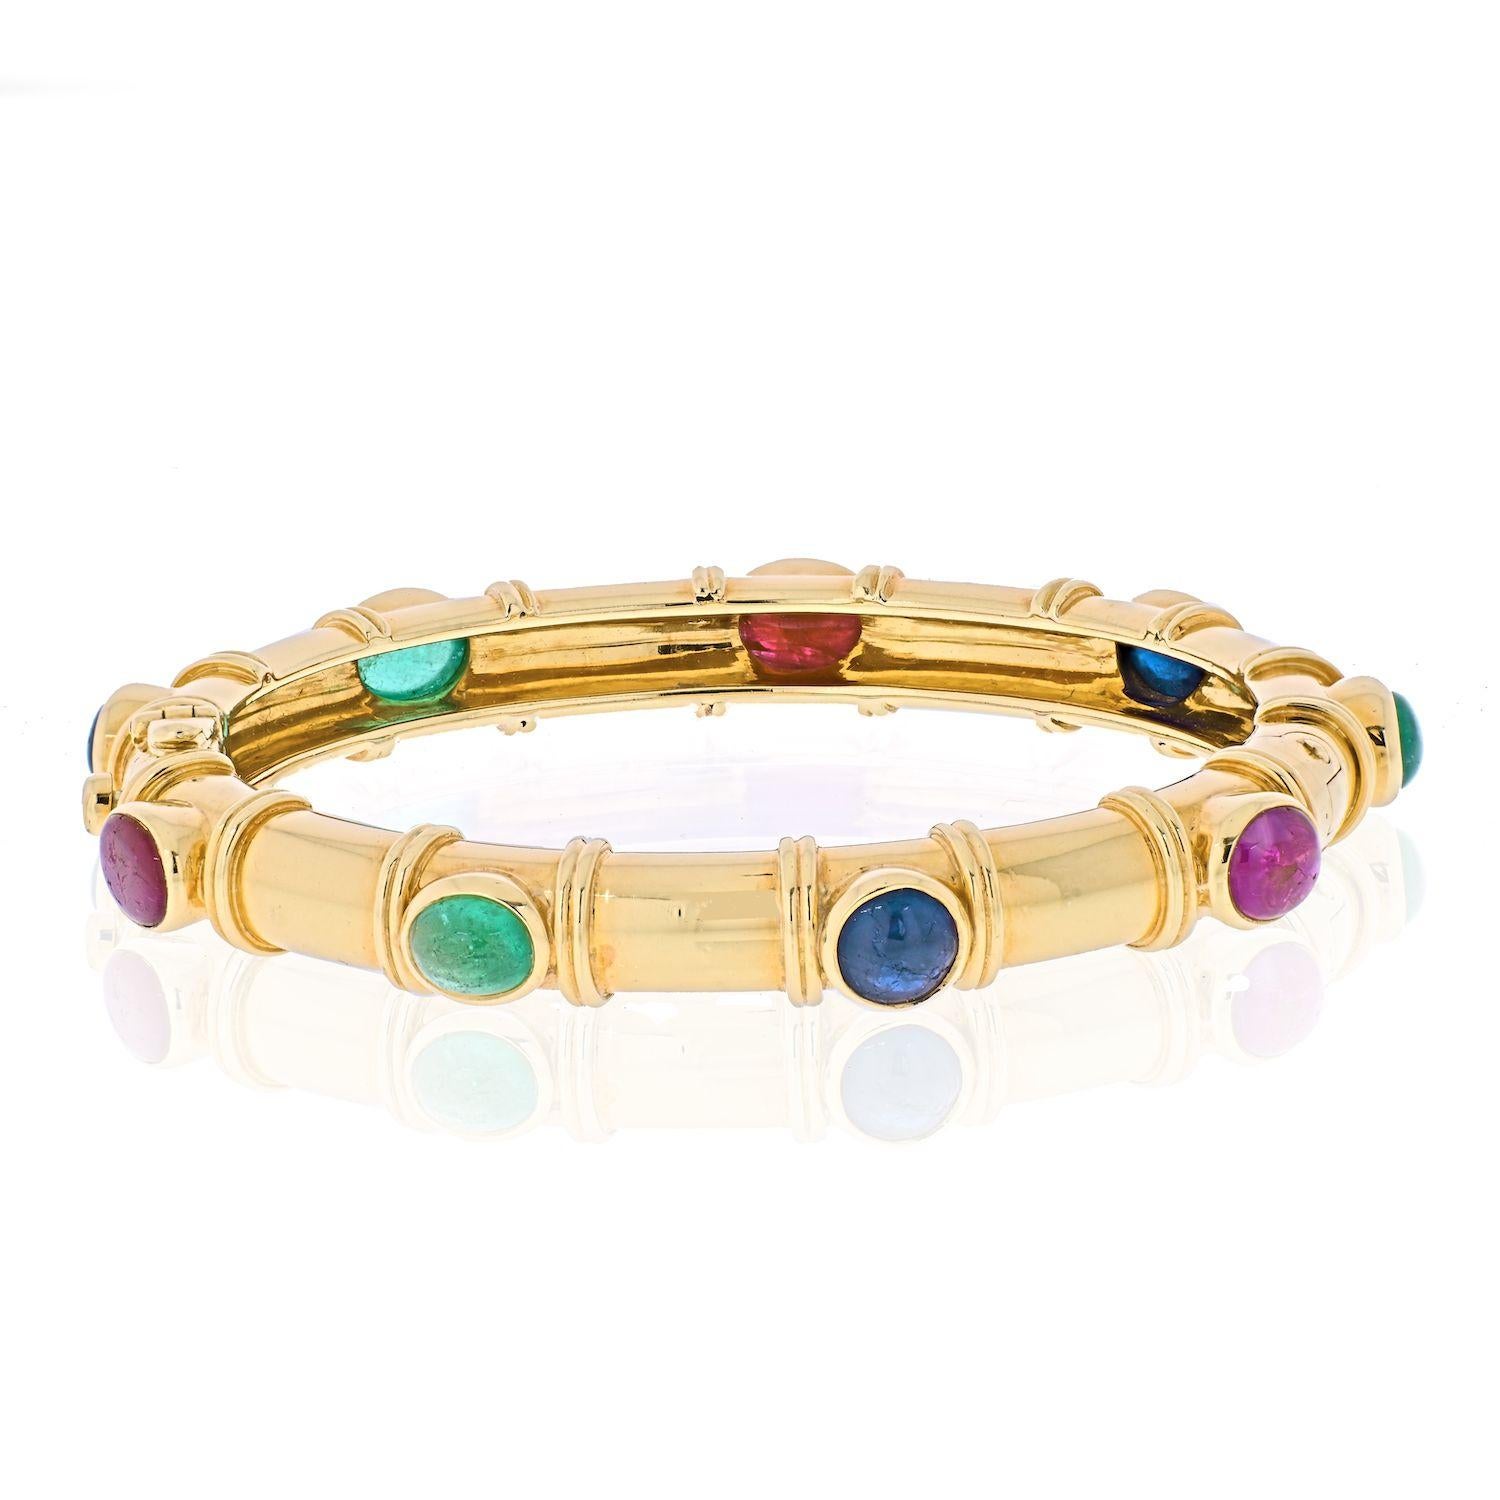 This yellow gold David Webb gemstone bangle bracelet is set with nine oval cut cabochon rubies, sapphires and emeralds. Designed with a hinged lock for easy wear it is elegant and minimalist, combined with pop of color making this bangle appear